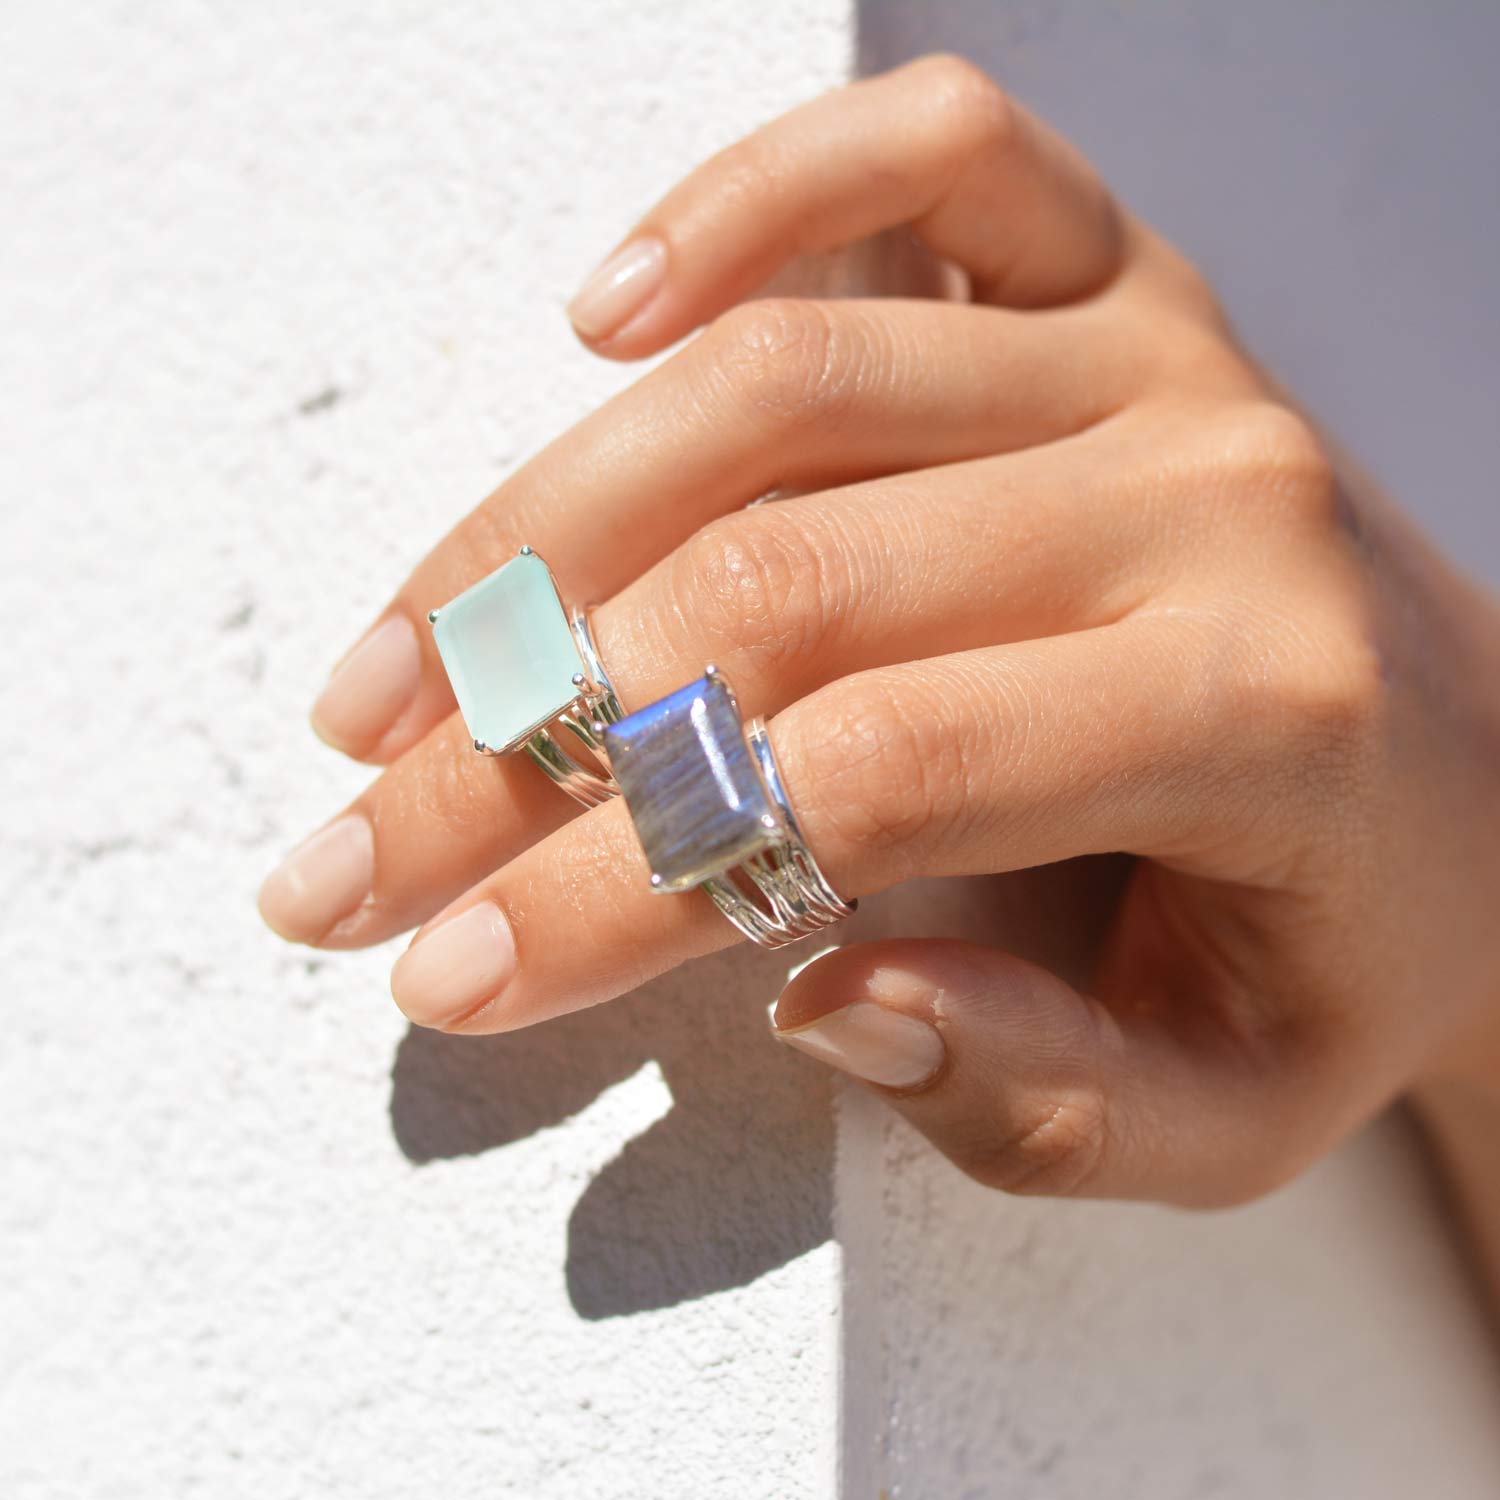 Silver cocktail ring, aqua chalcedony gemstone, geometric, cocktail, ring